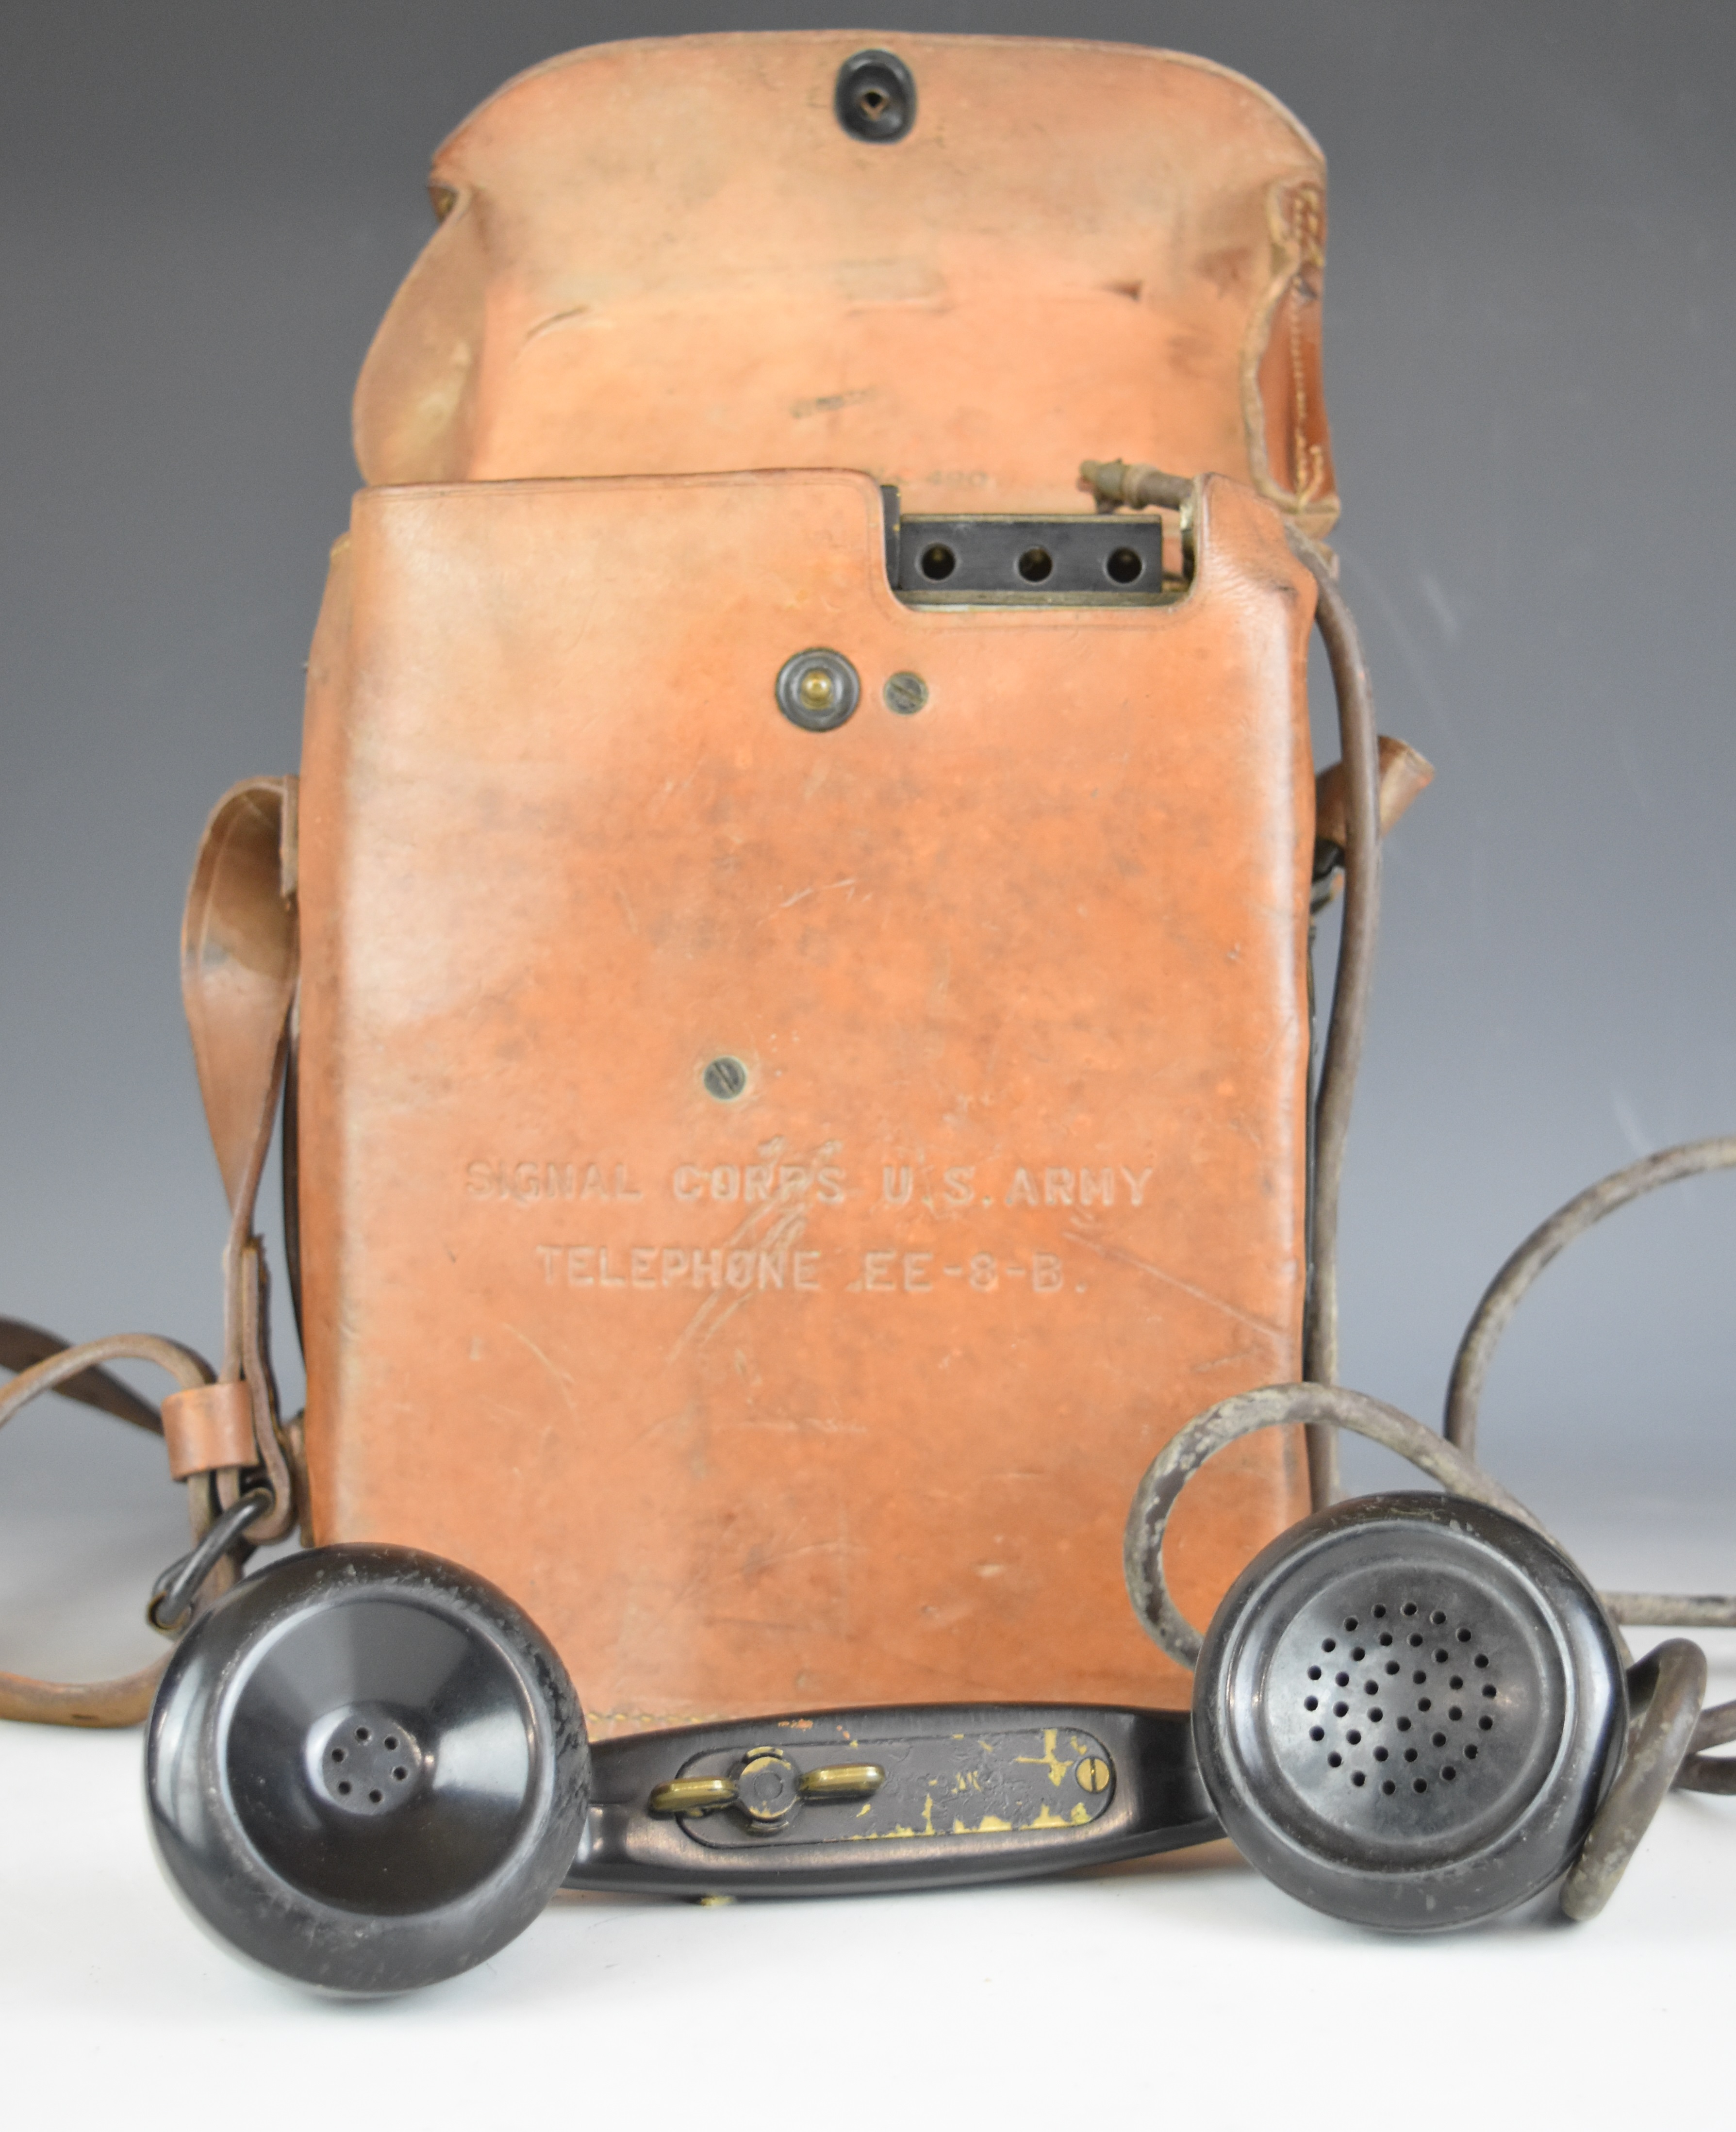 American WW2 Signal Corps telephone EE-8-B, with leather carry case and strap